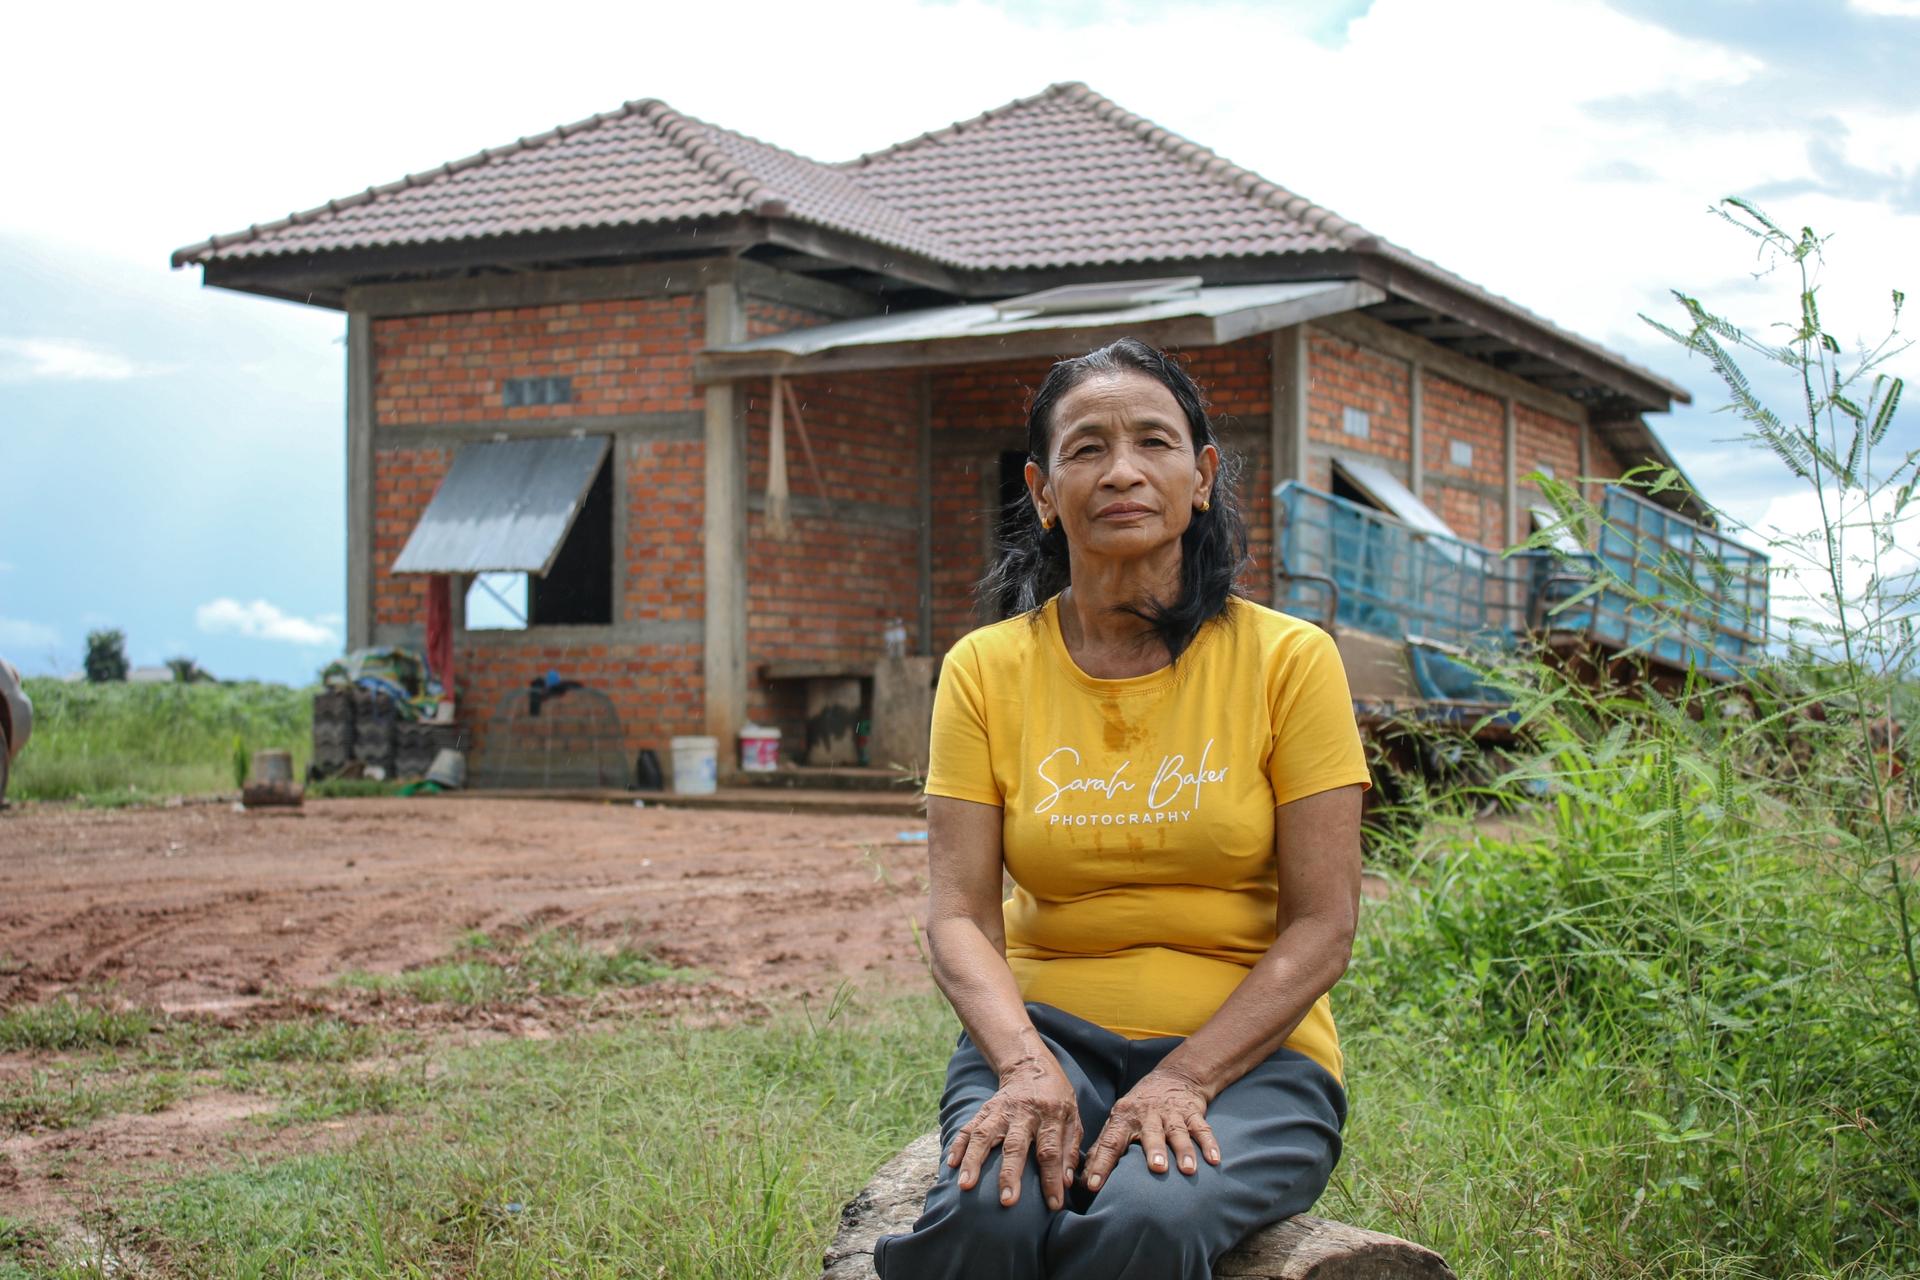 A woman posing in a yellow shirt and jeans in front of a house